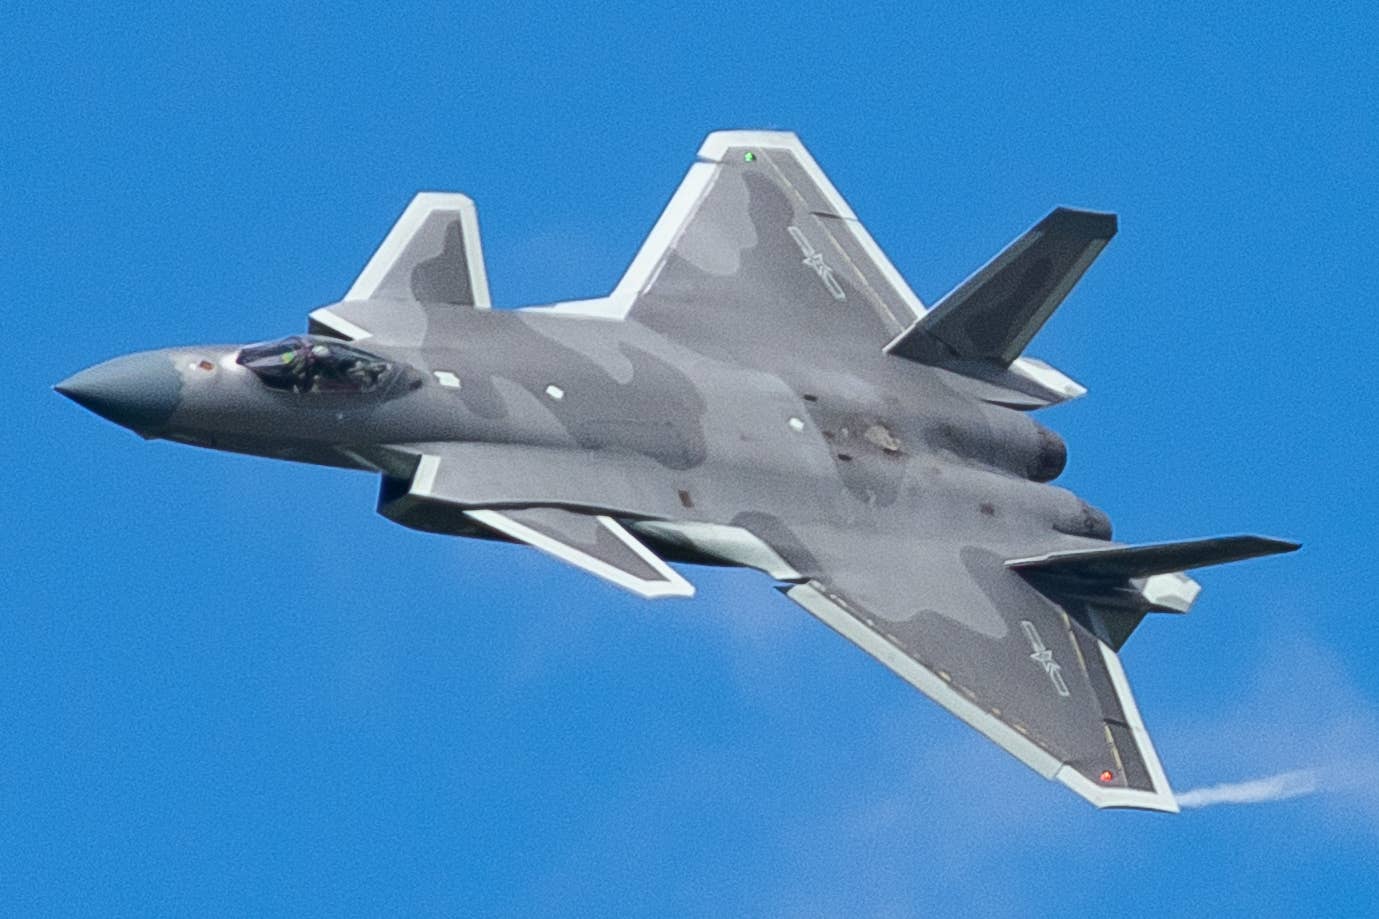 A PLAAF J-20 performs during an airshow display. <em>N509FZ/Wikimedia Commons</em>